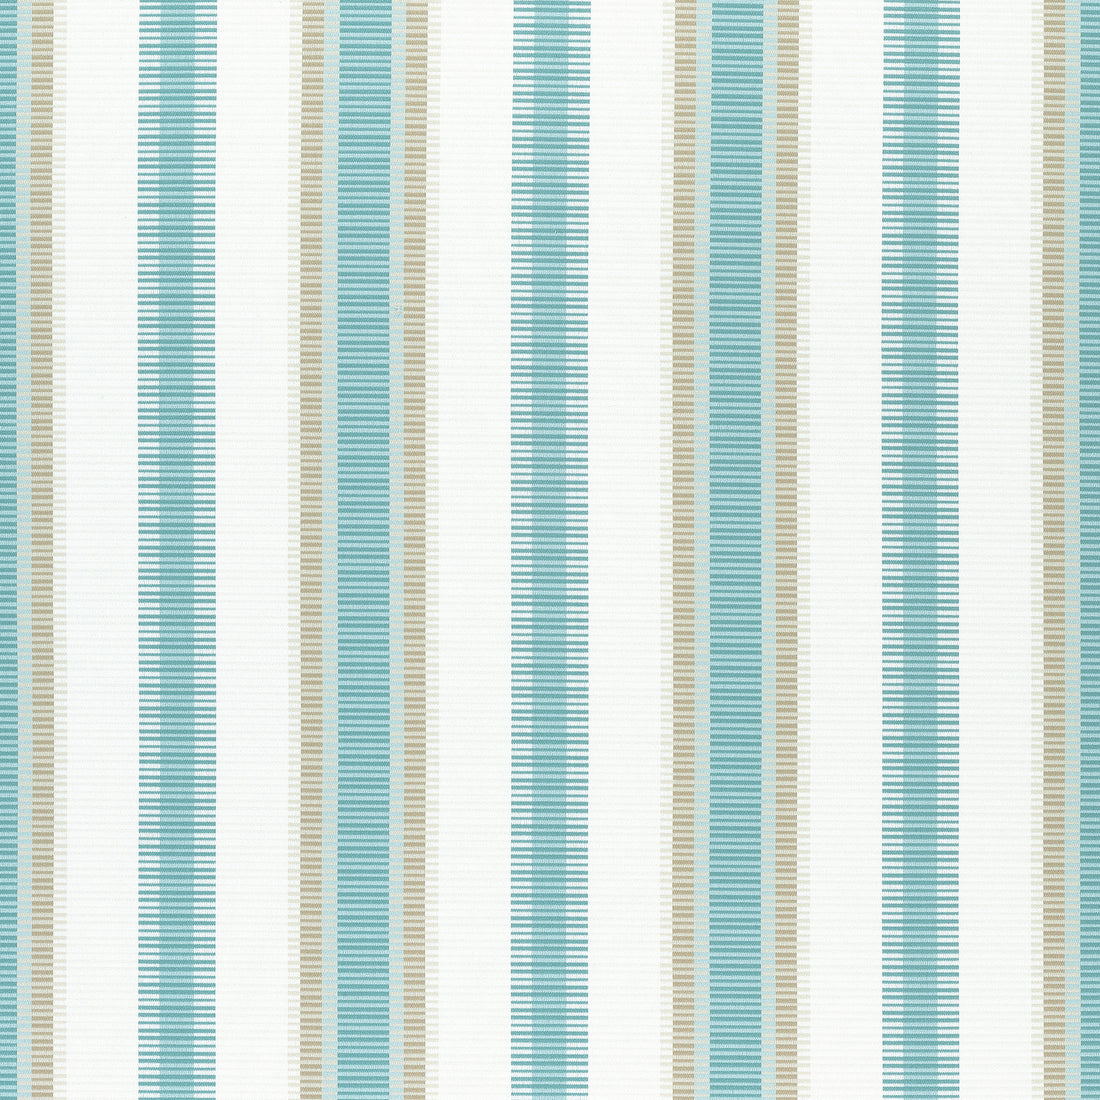 Samba Stripe fabric in pool and sand color - pattern number W74673 - by Thibaut in the Festival collection